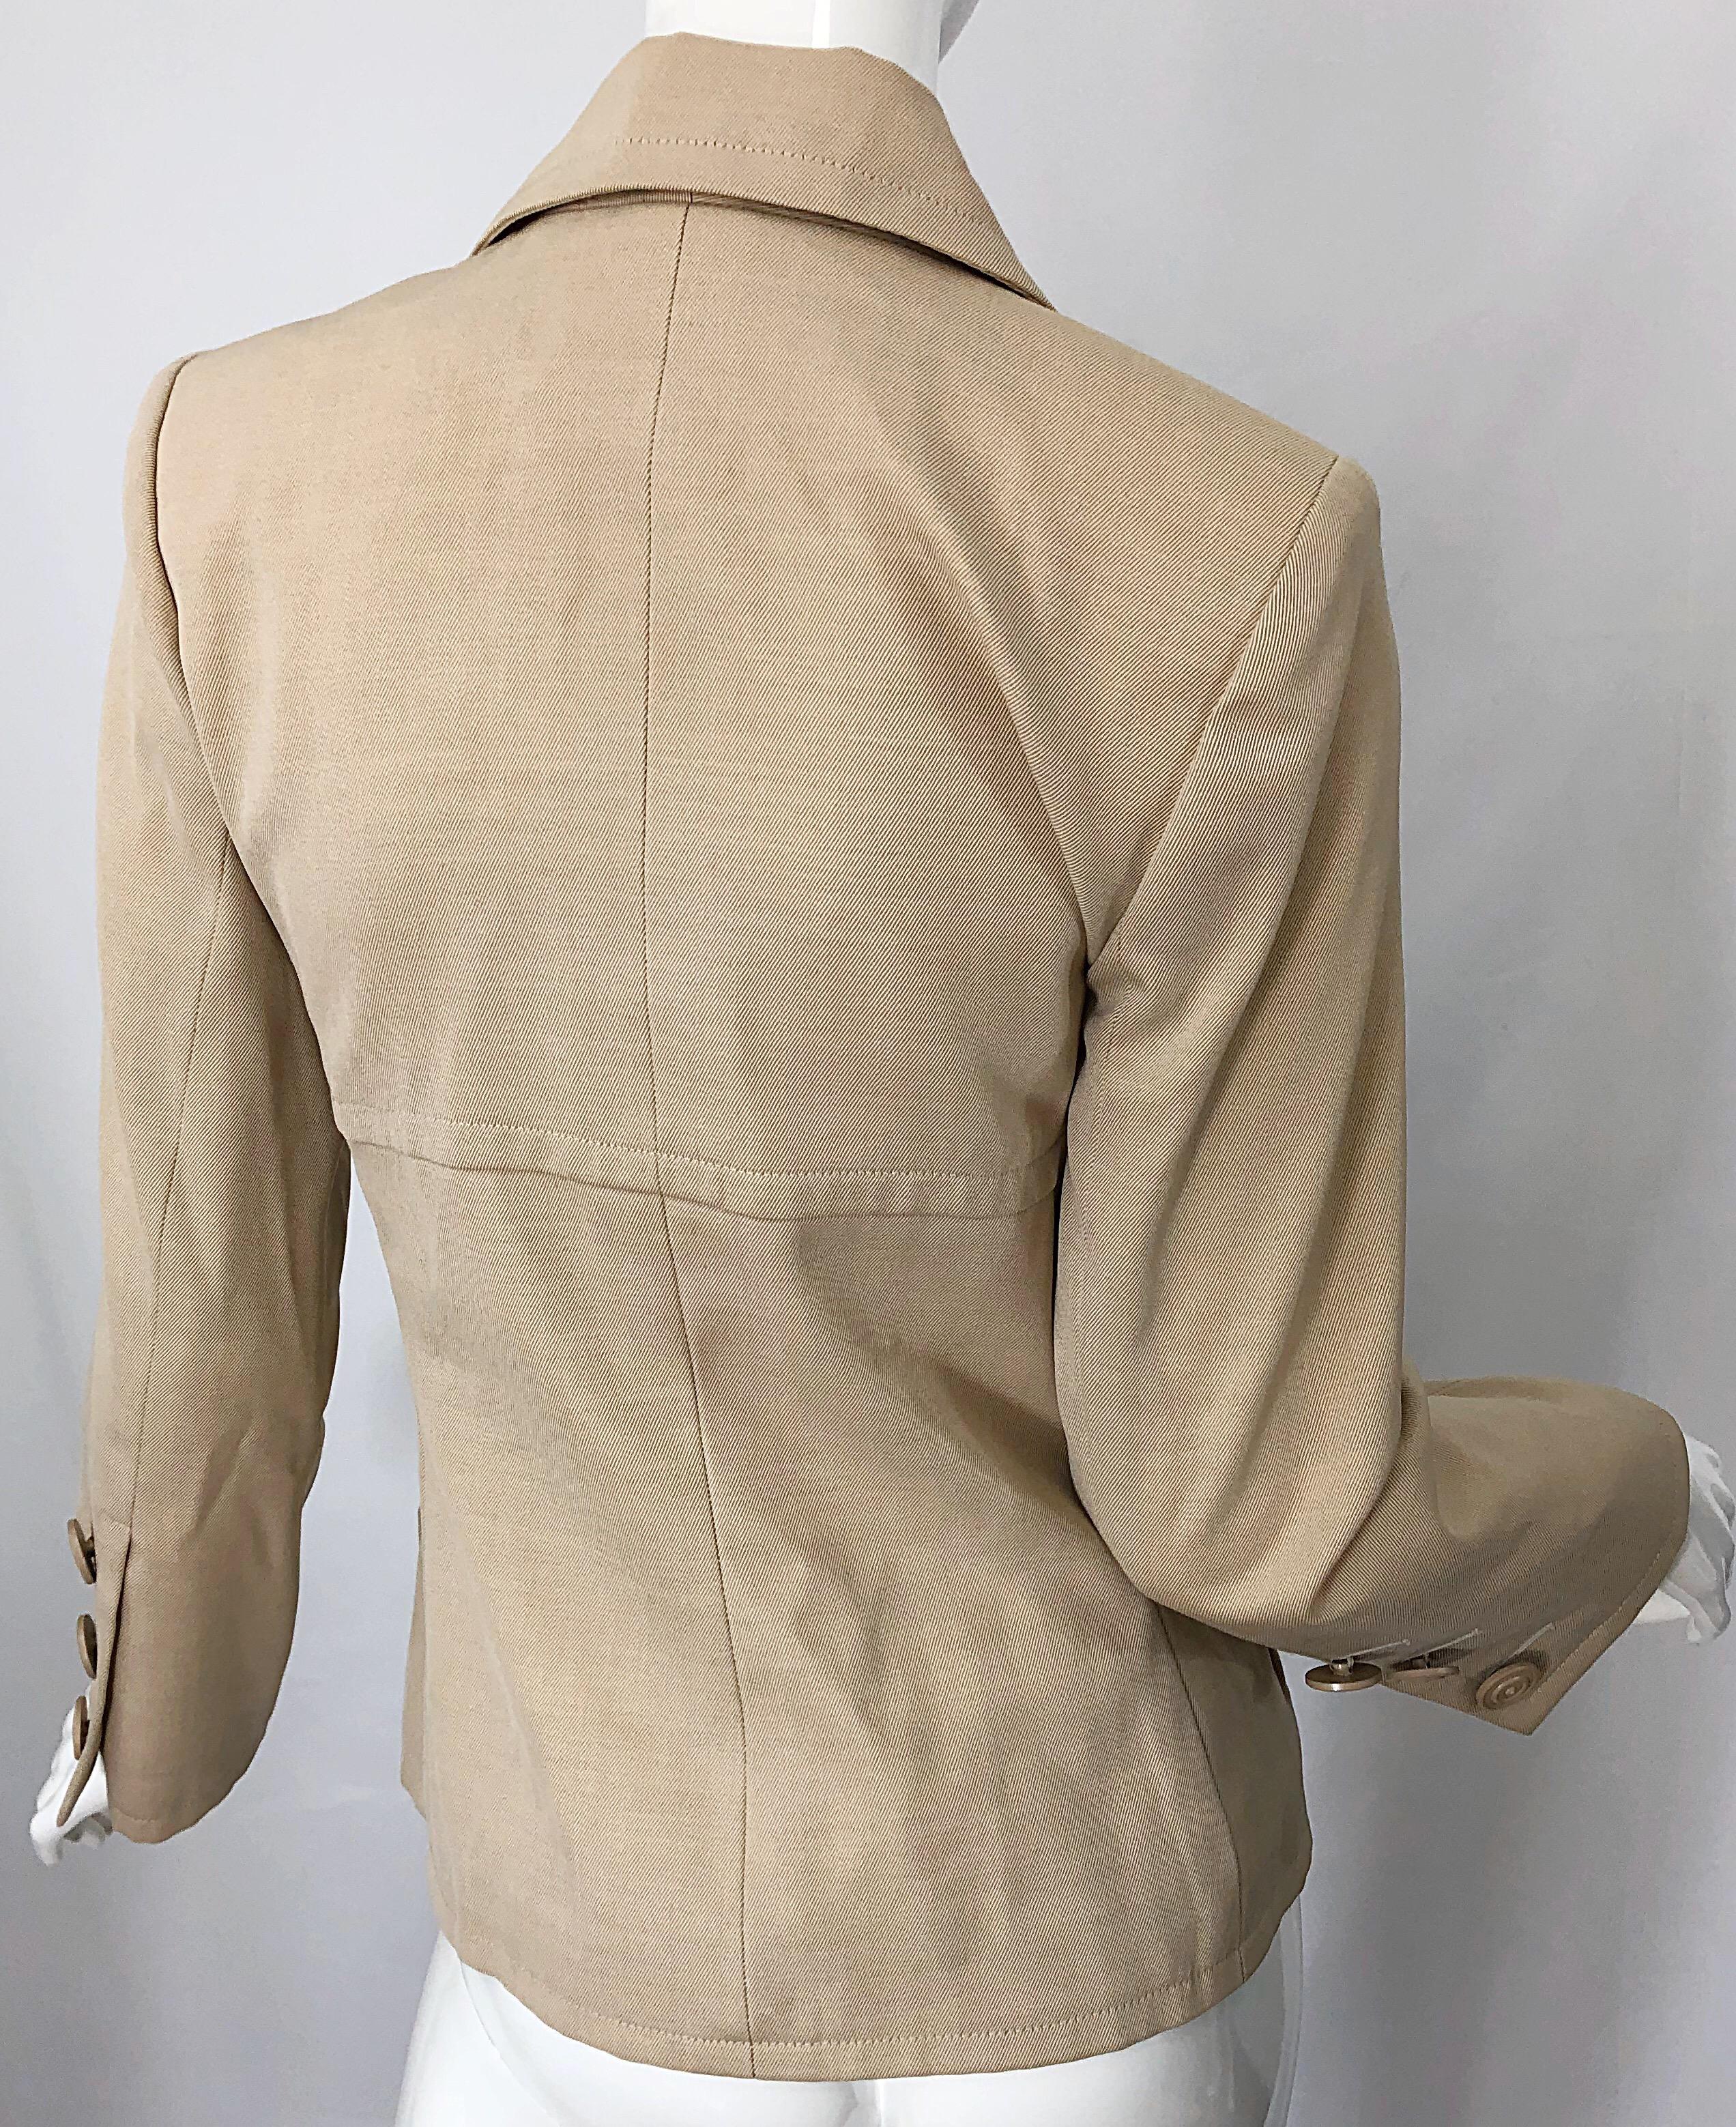 Vintage Givenchy Couture by Alexander McQueen 1990s Khaki Tan 90s Jacket Blazer 4